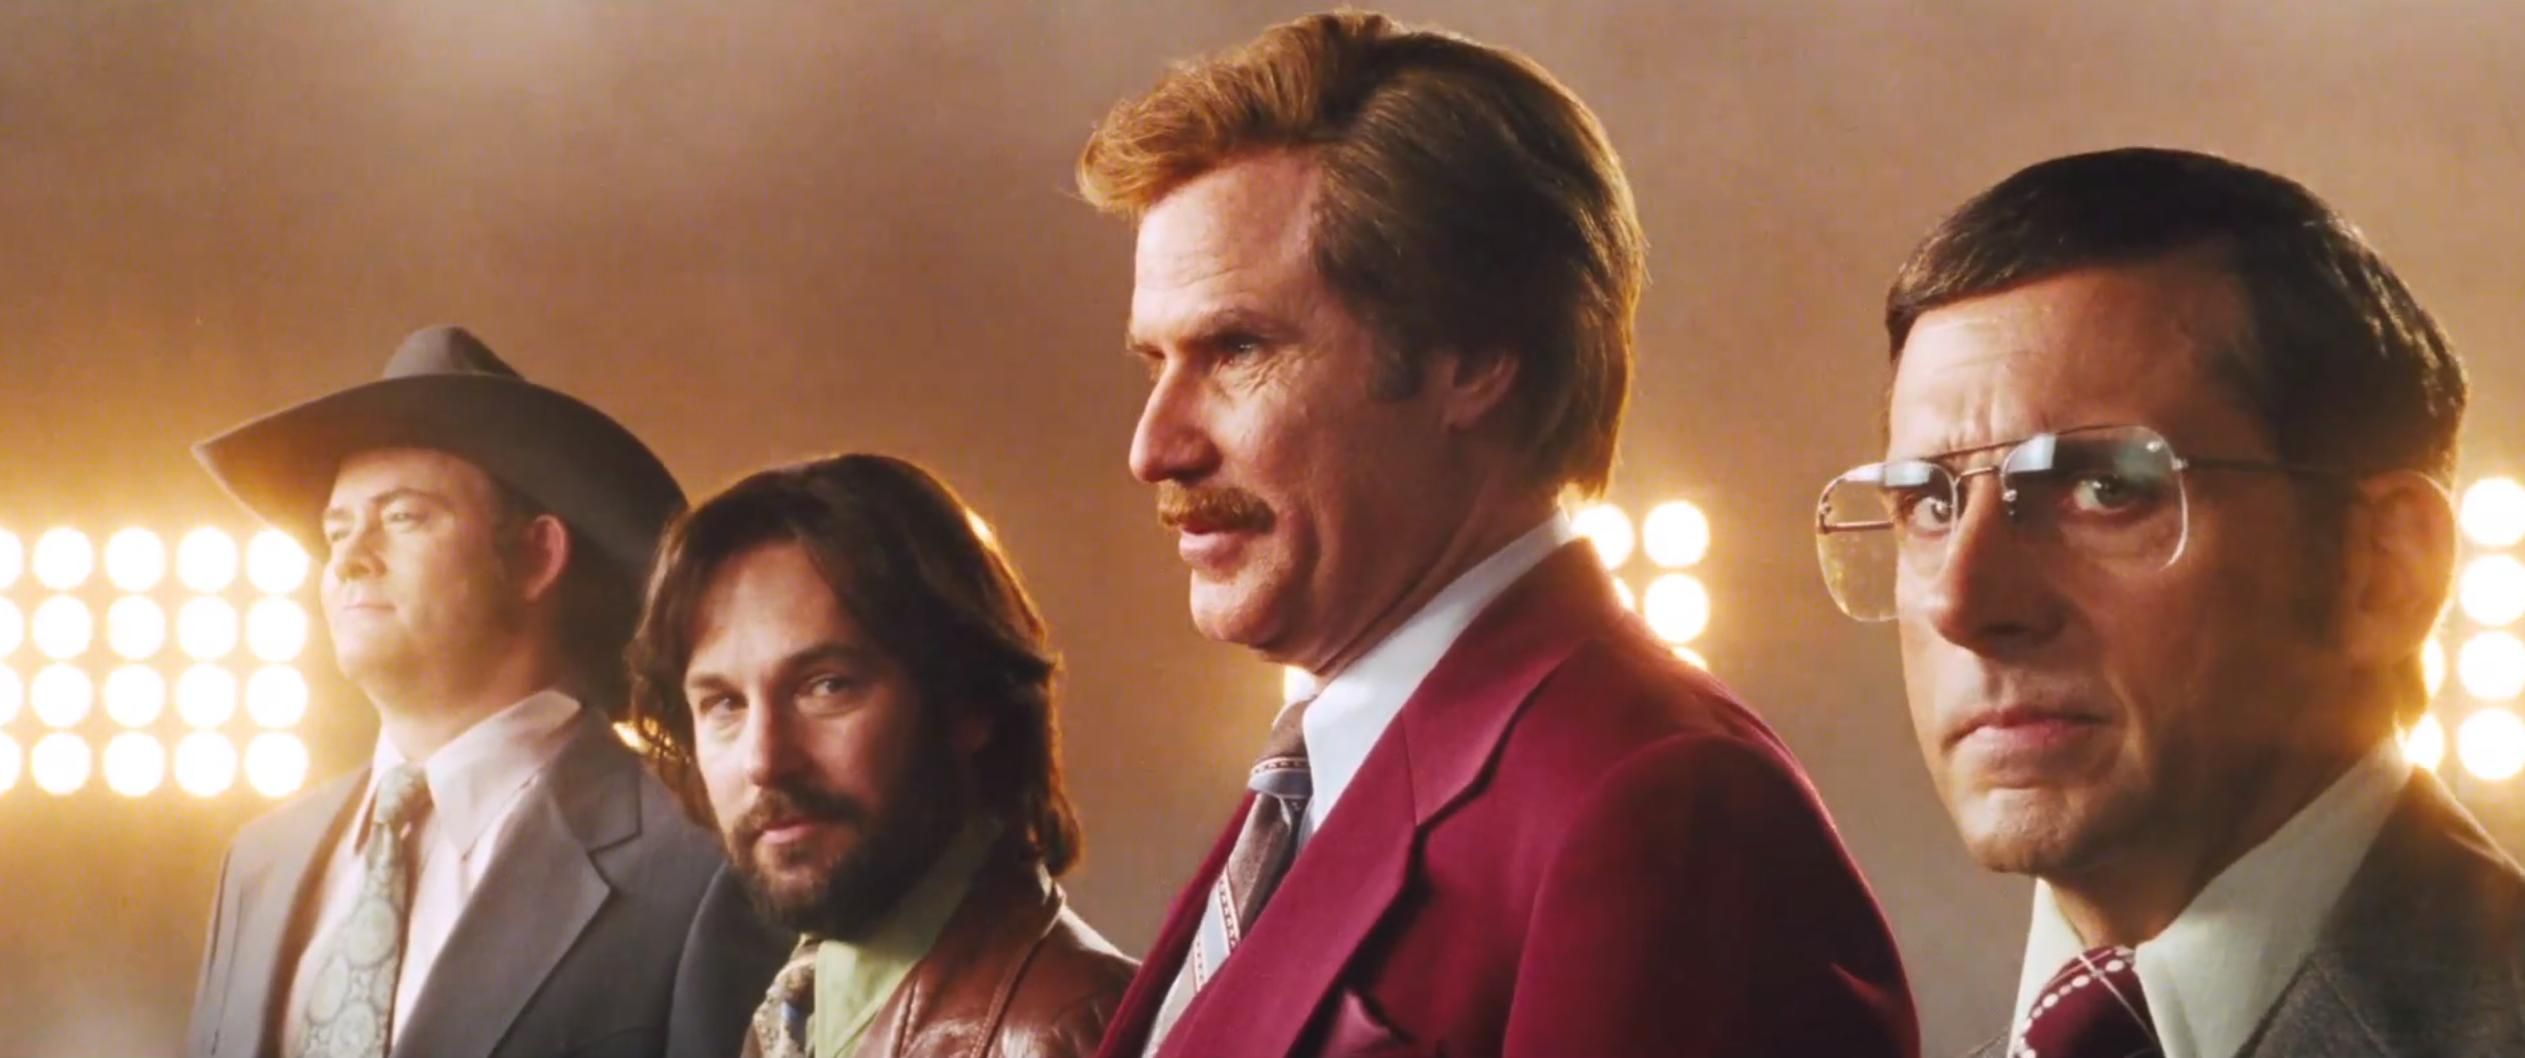 Ron Burgundy Wallpapers - Wallpaper Cave